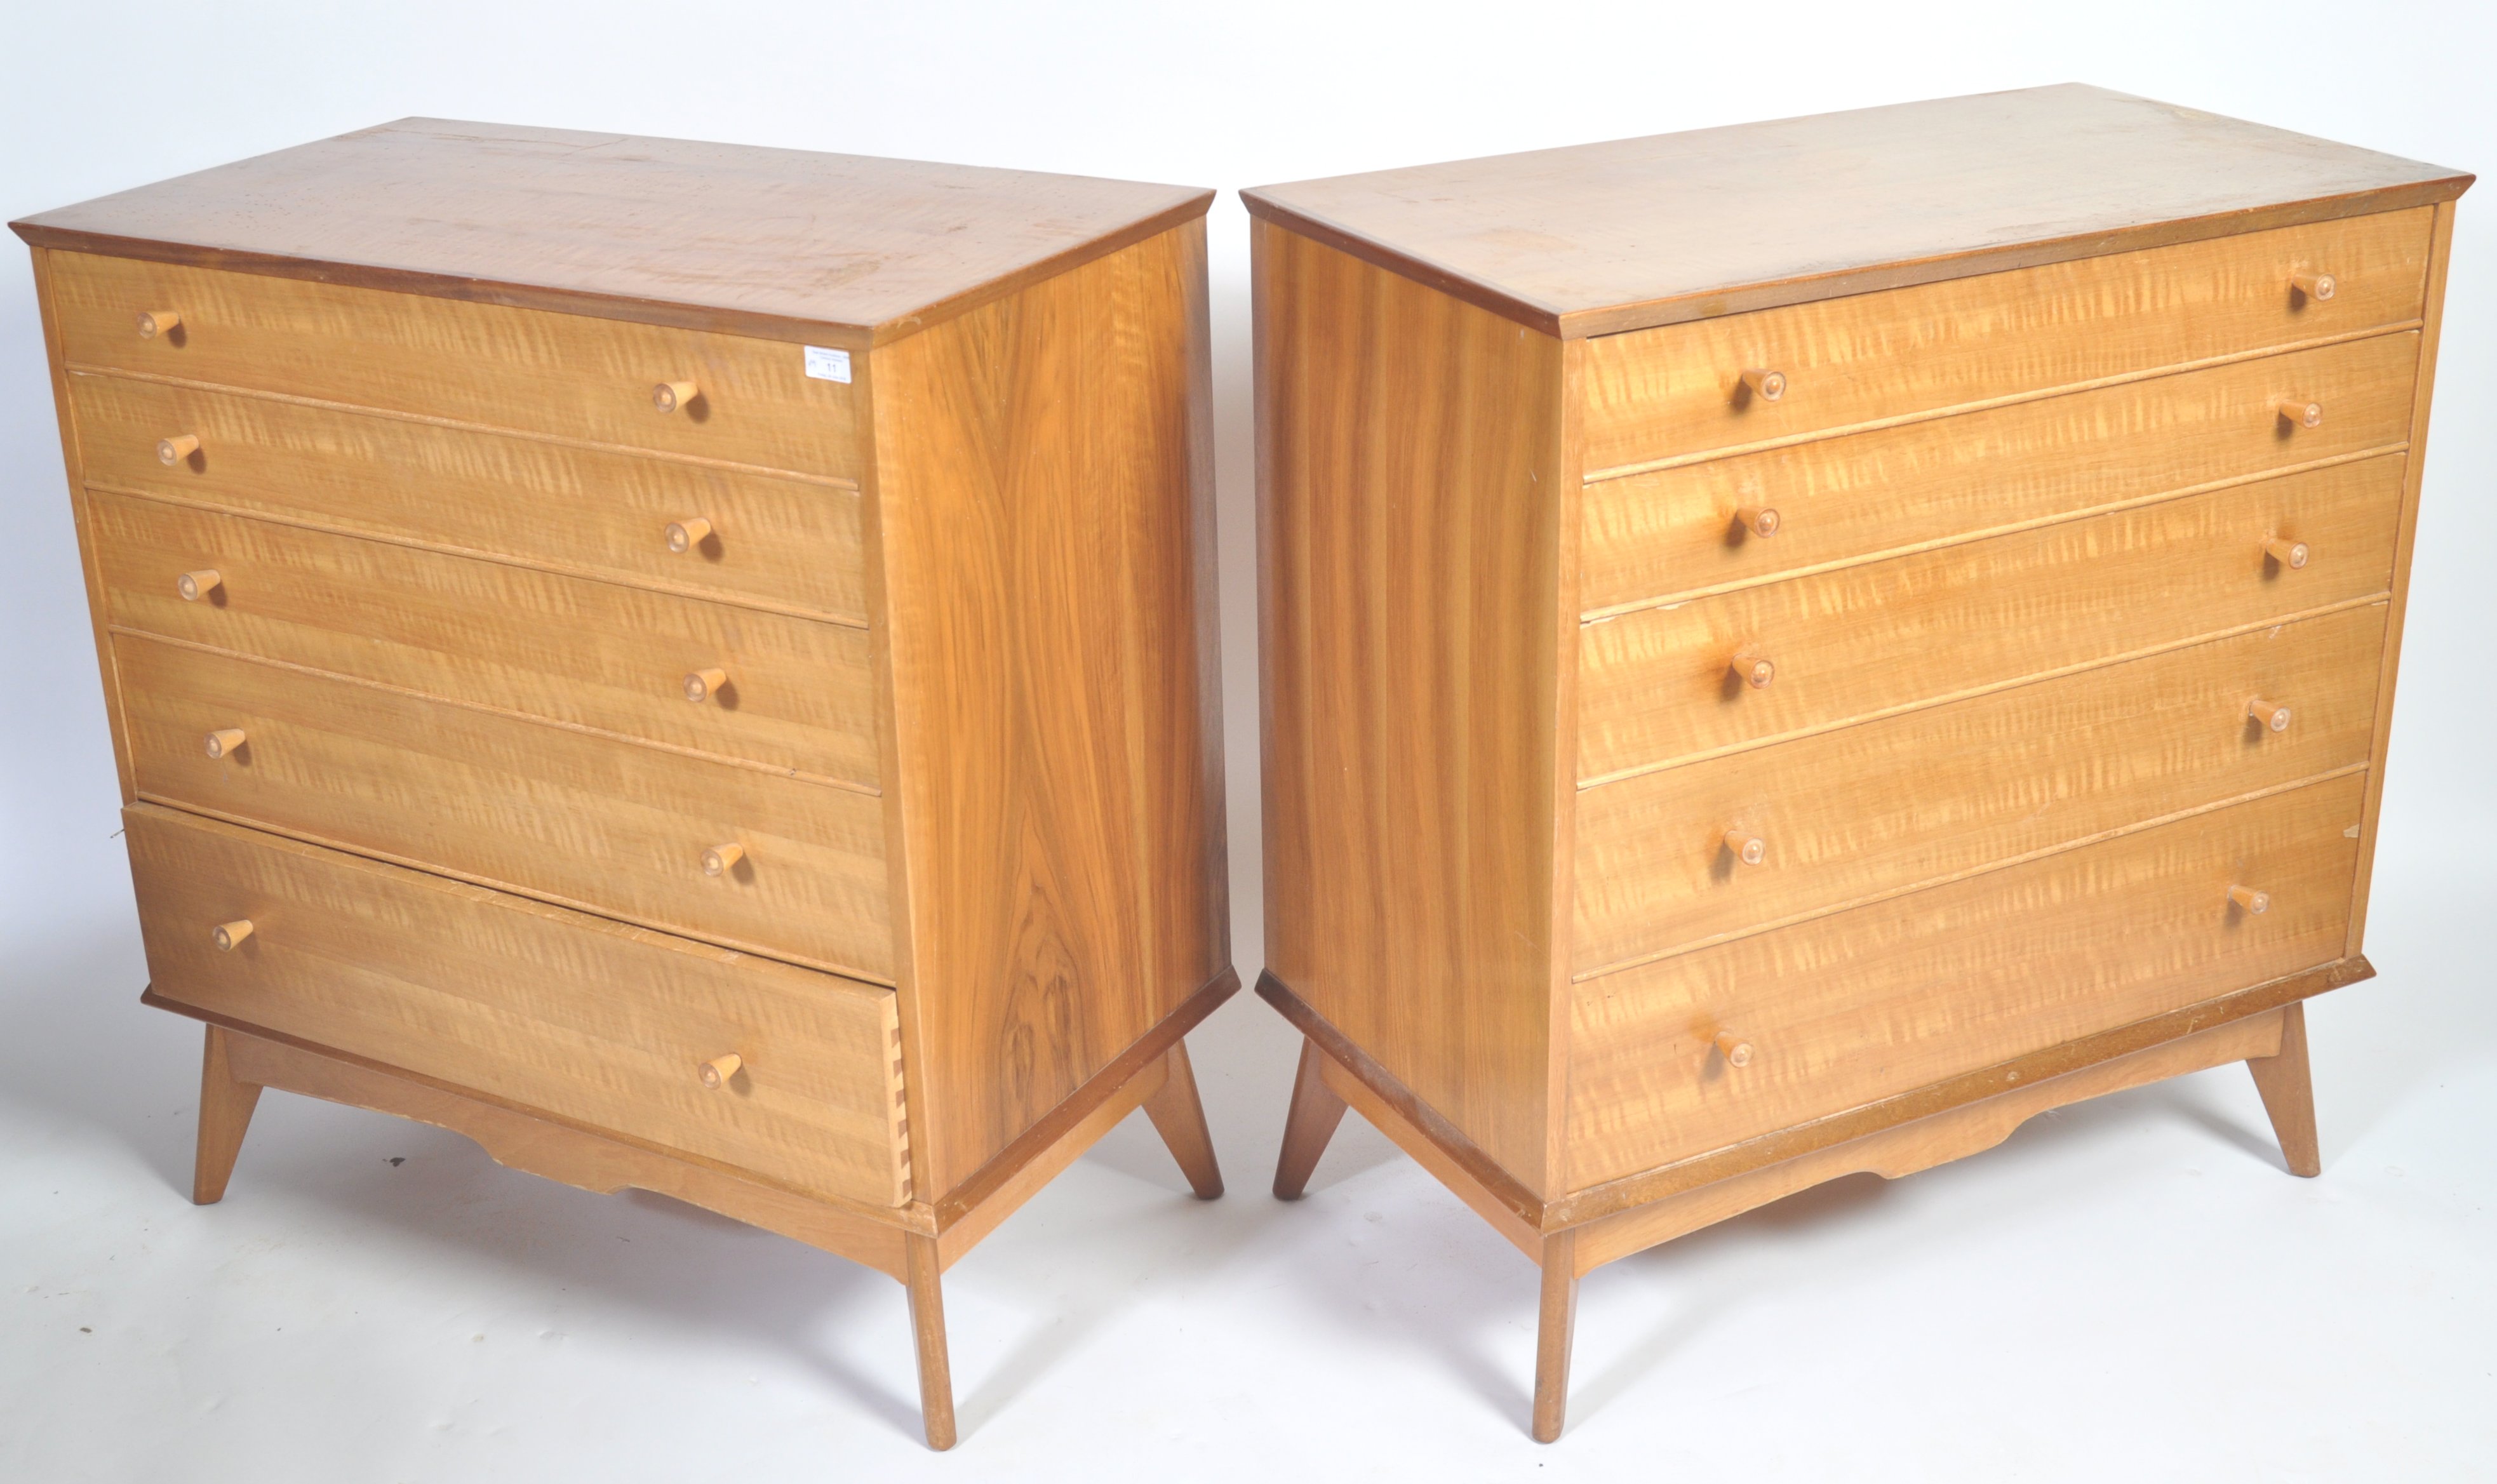 AC FURNITURE MID CENTURY CHESTS OF DRAWERS BY ALFR - Image 2 of 7